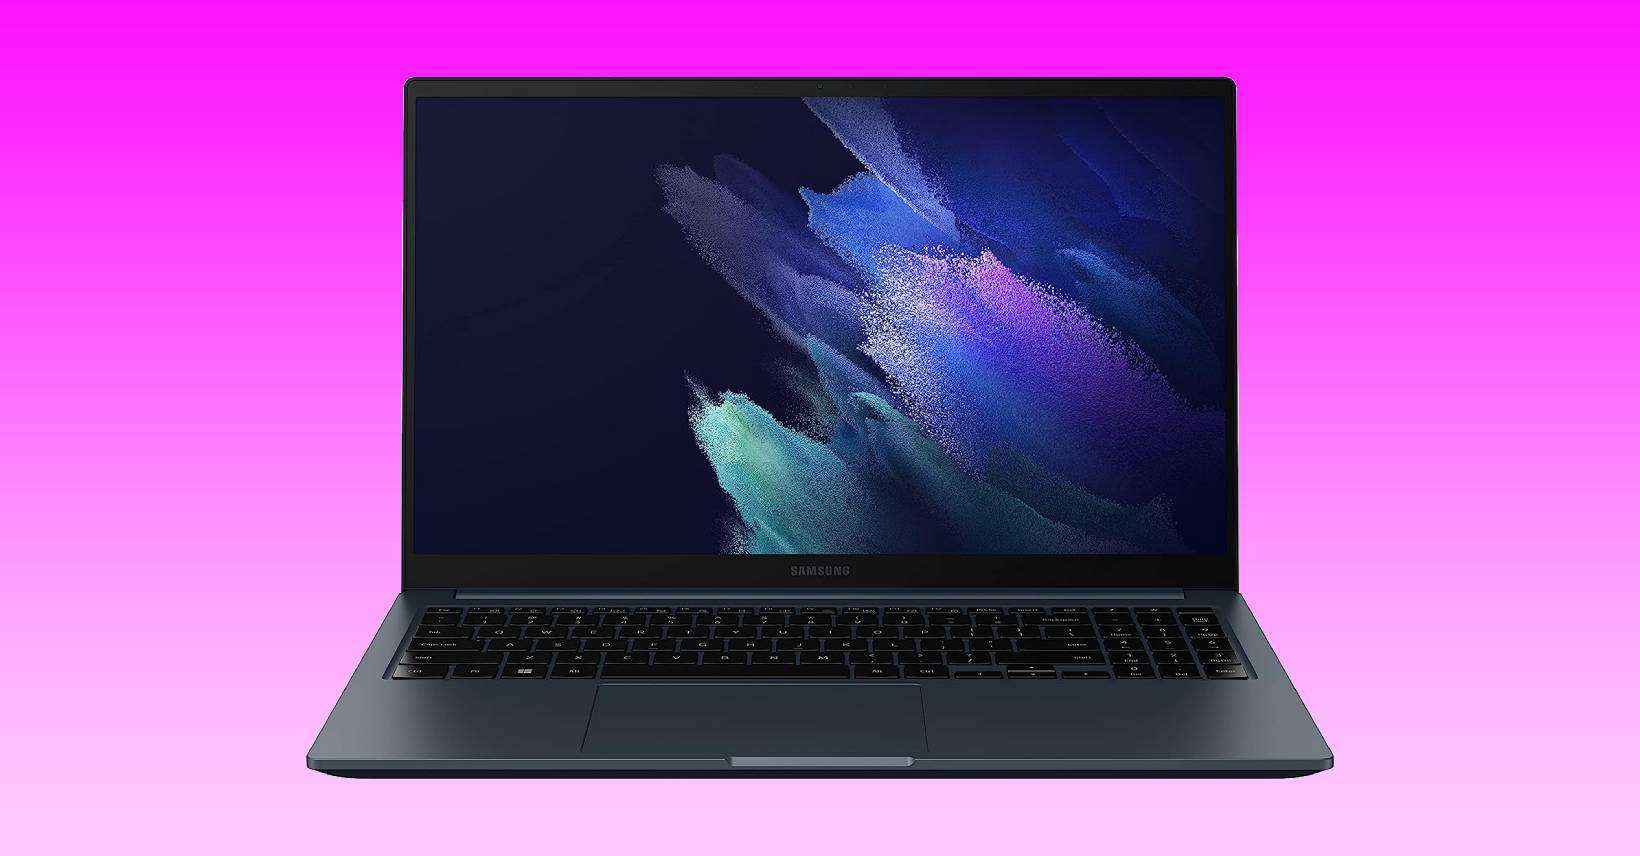 Save $75 on the Samsung Galaxy Book Odyssey Laptop – Prime Day Deal